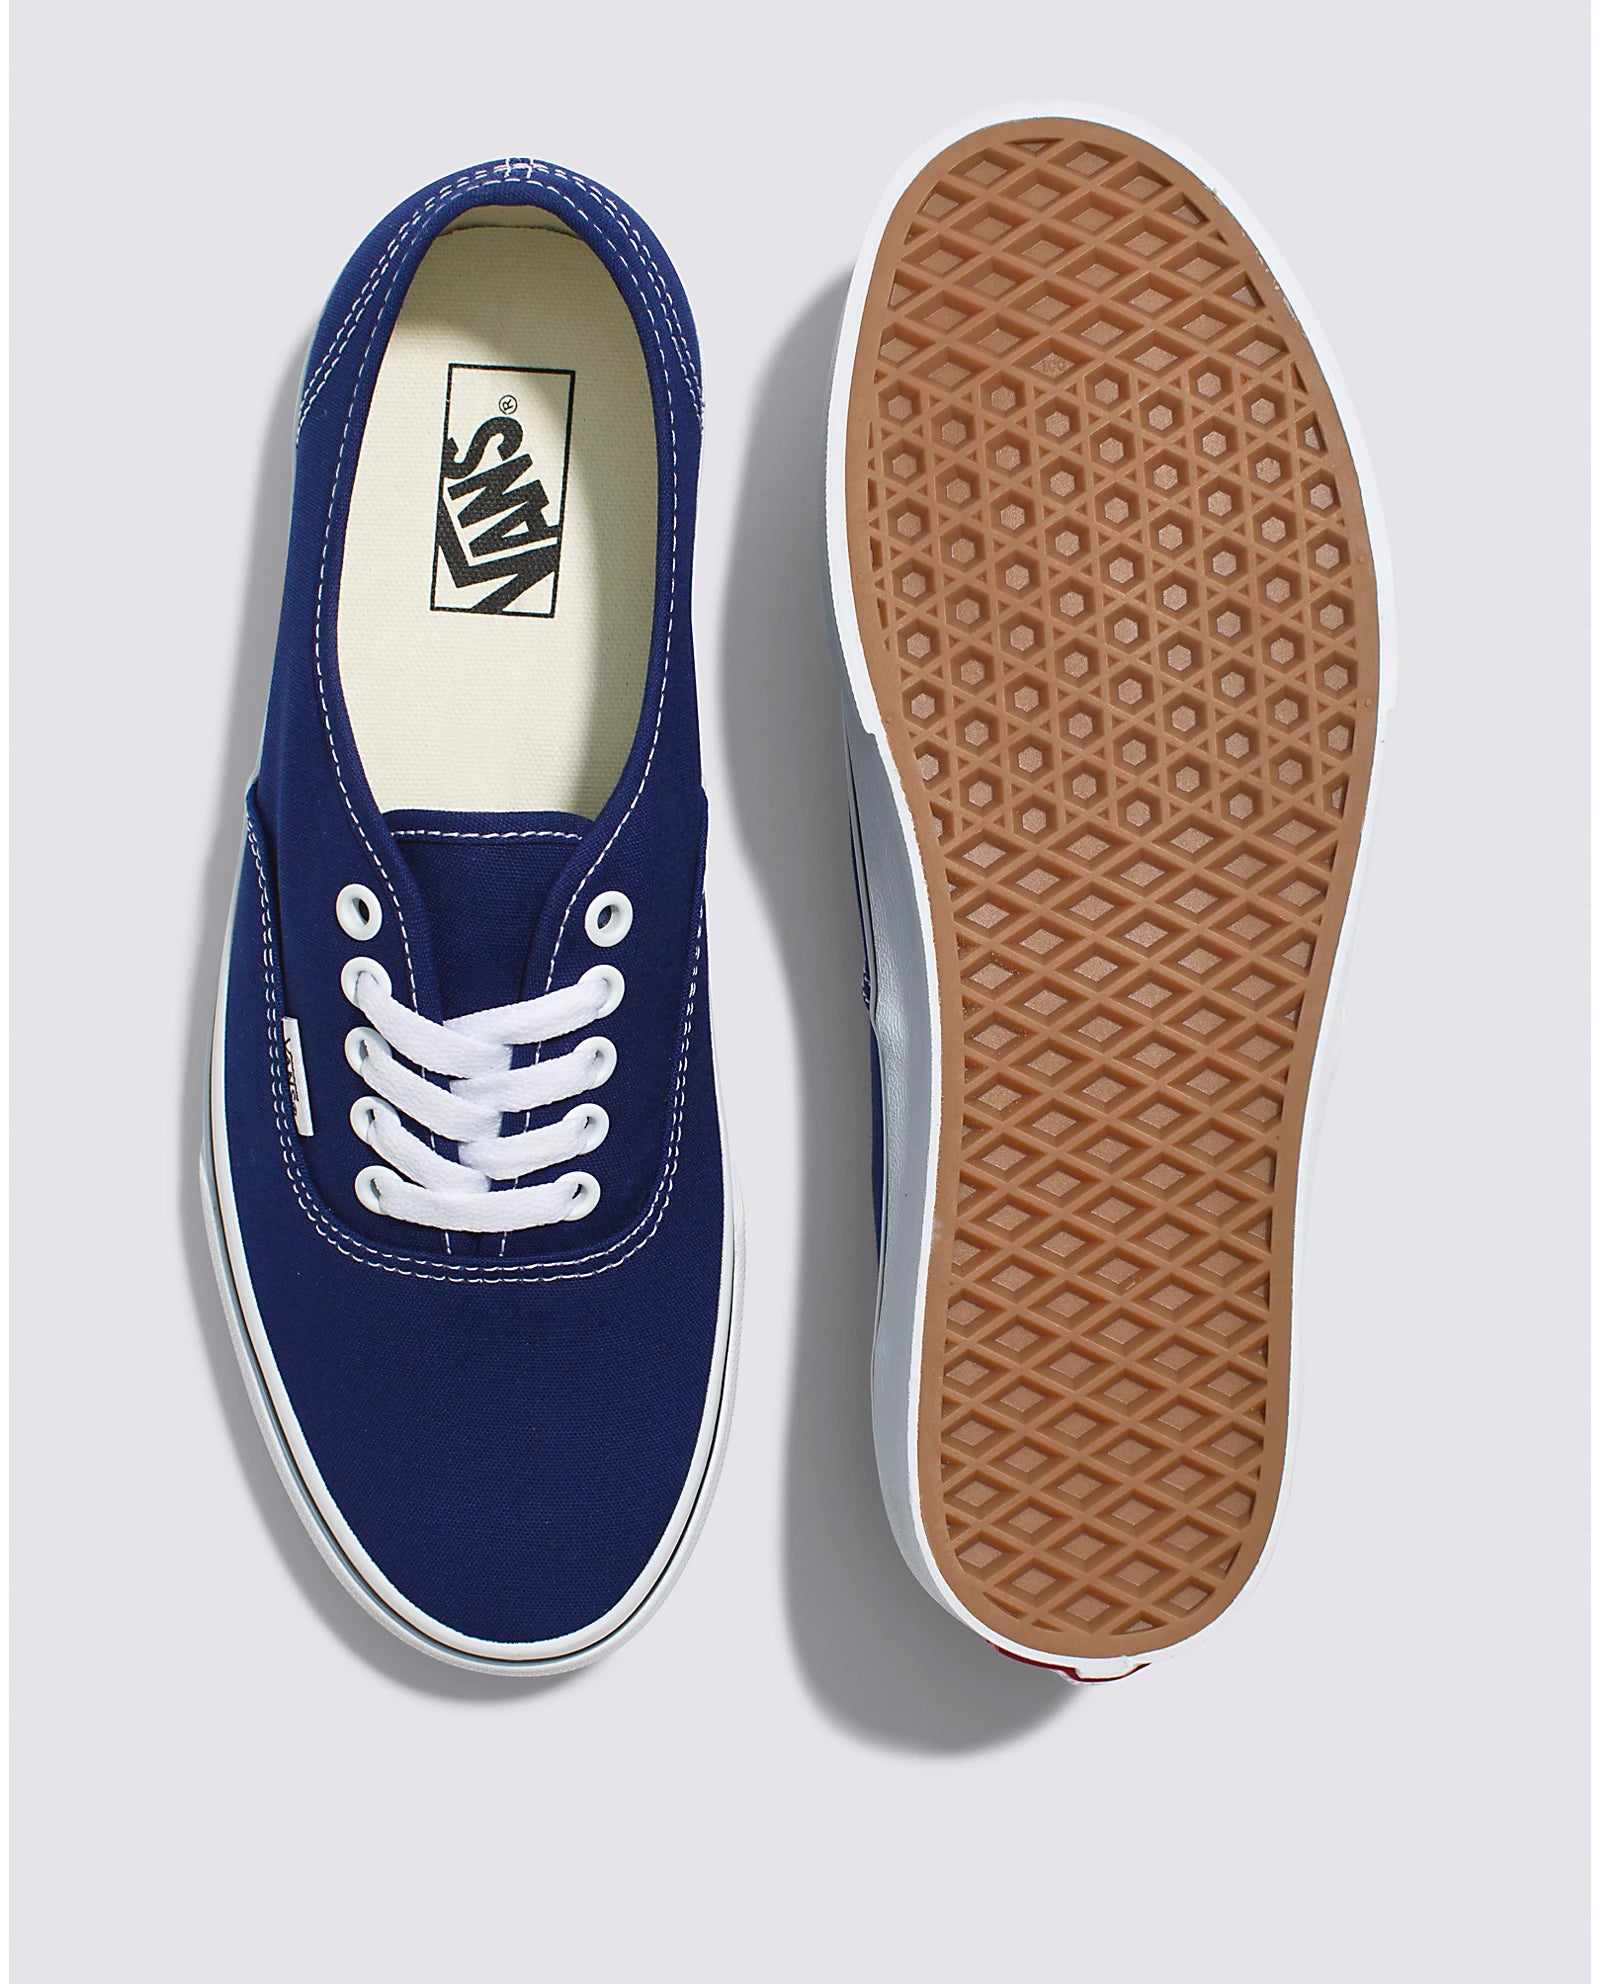 Authentic Color Theory Beacon Blue